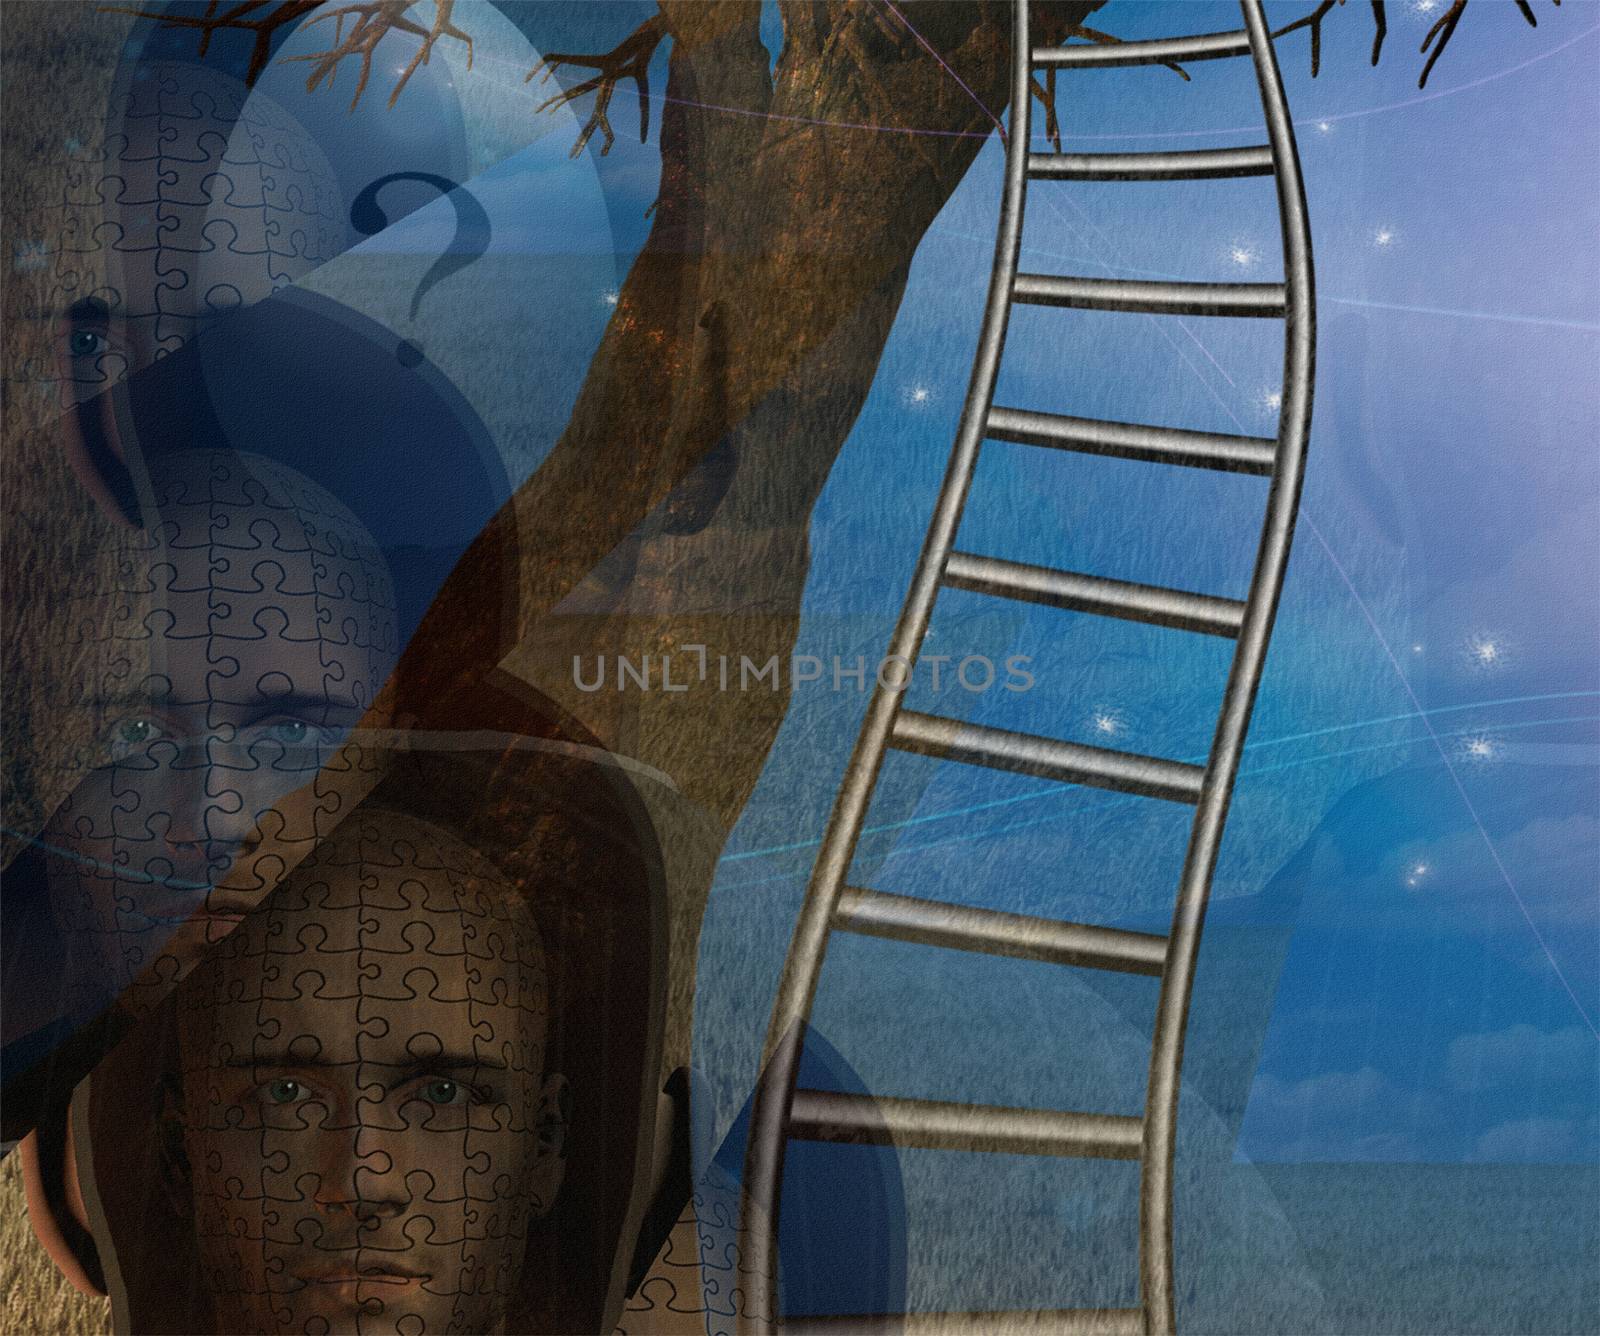 Human faces and twisted ladder. 3D rendering